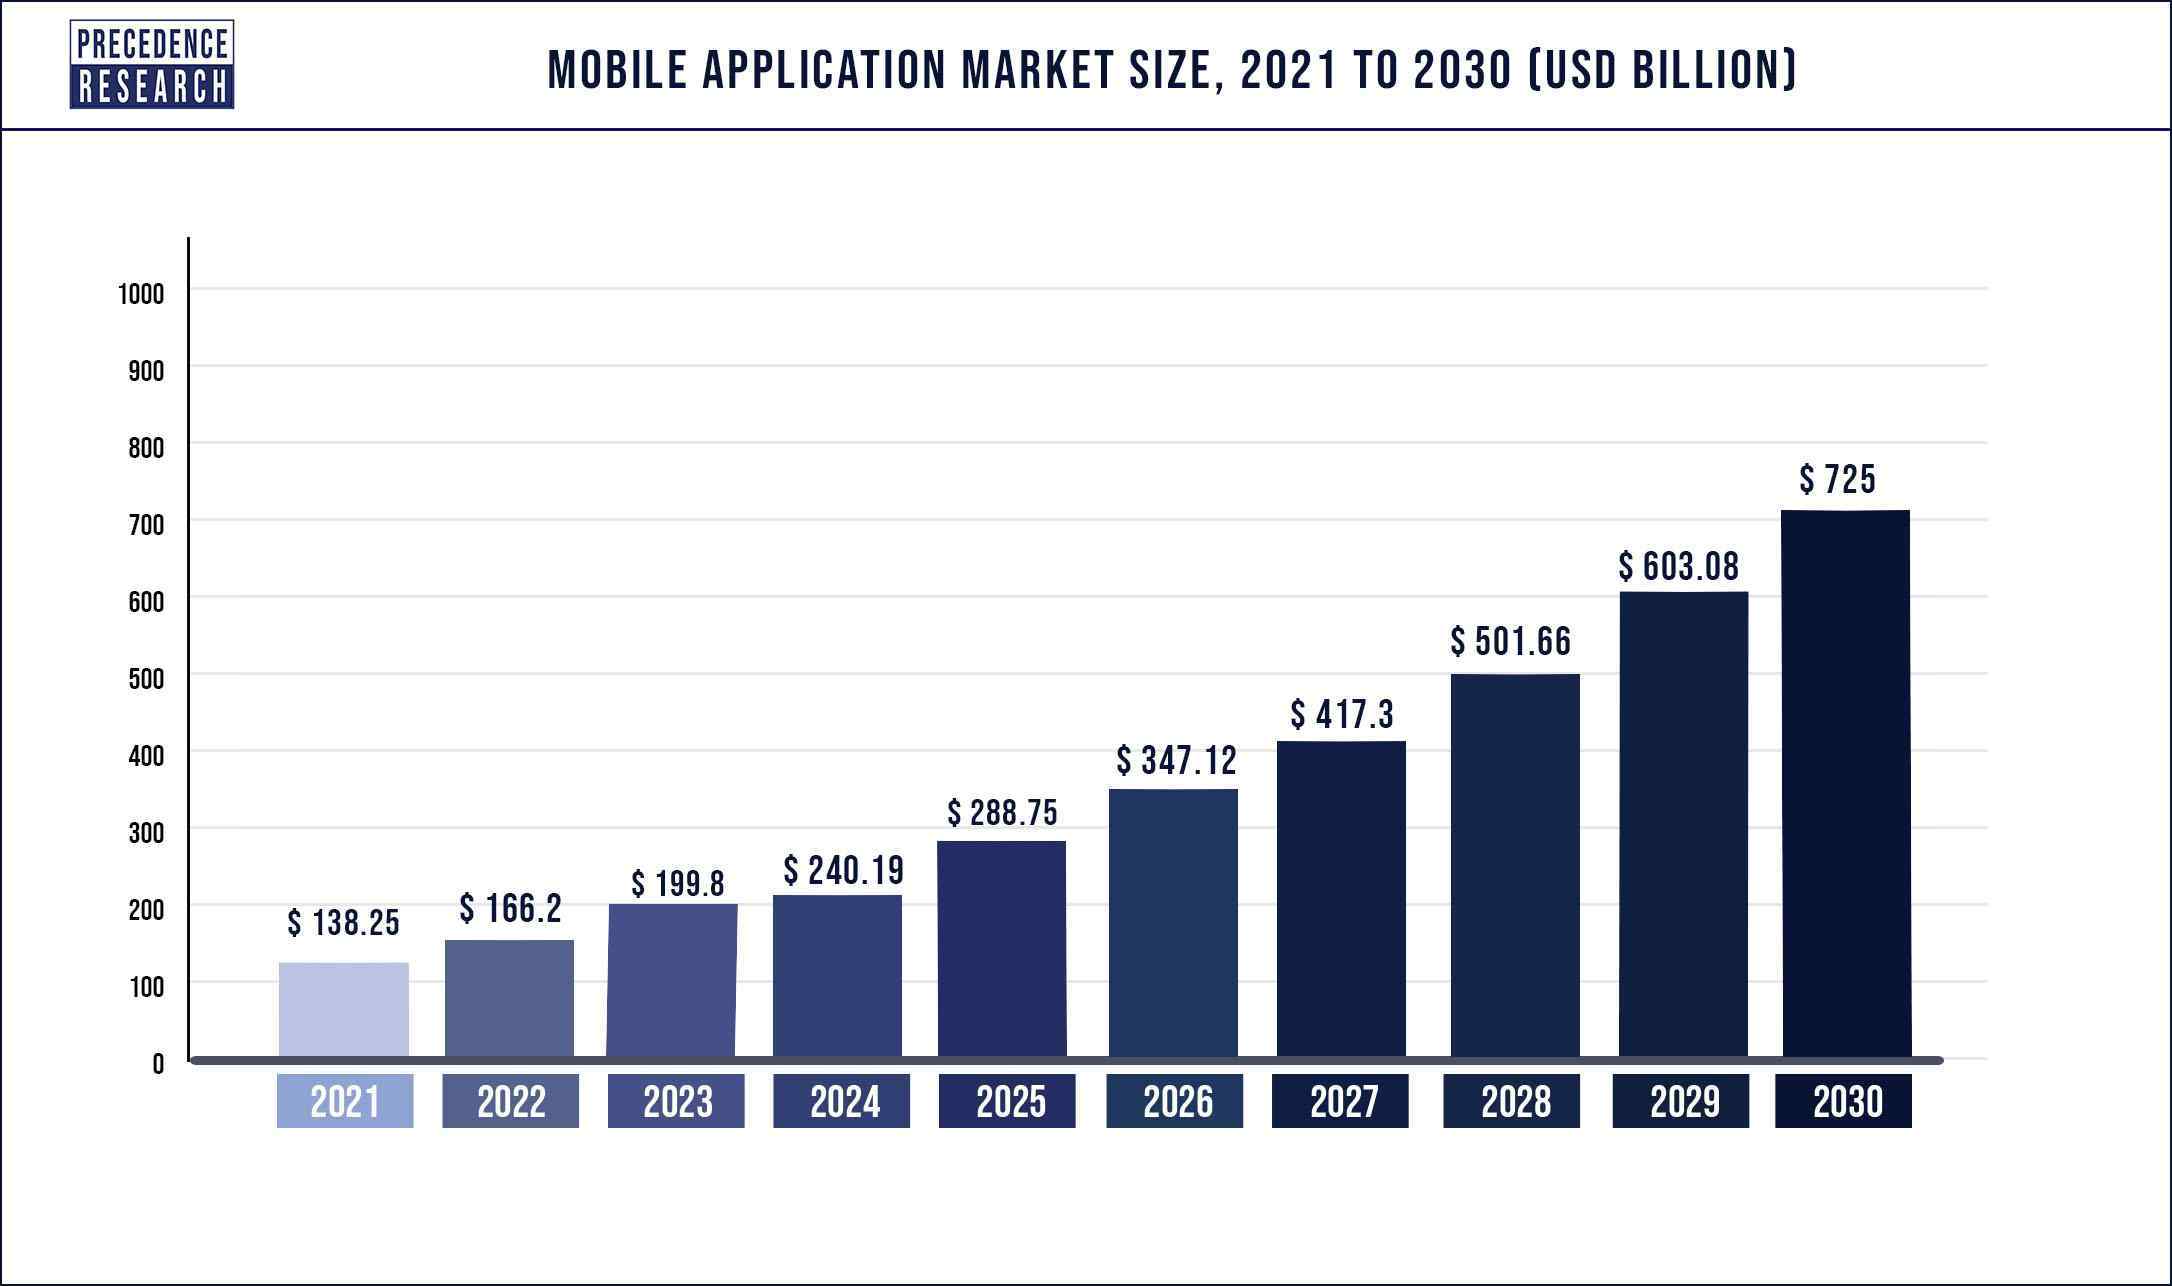 Mobile Application Market Size 2021 to 2030